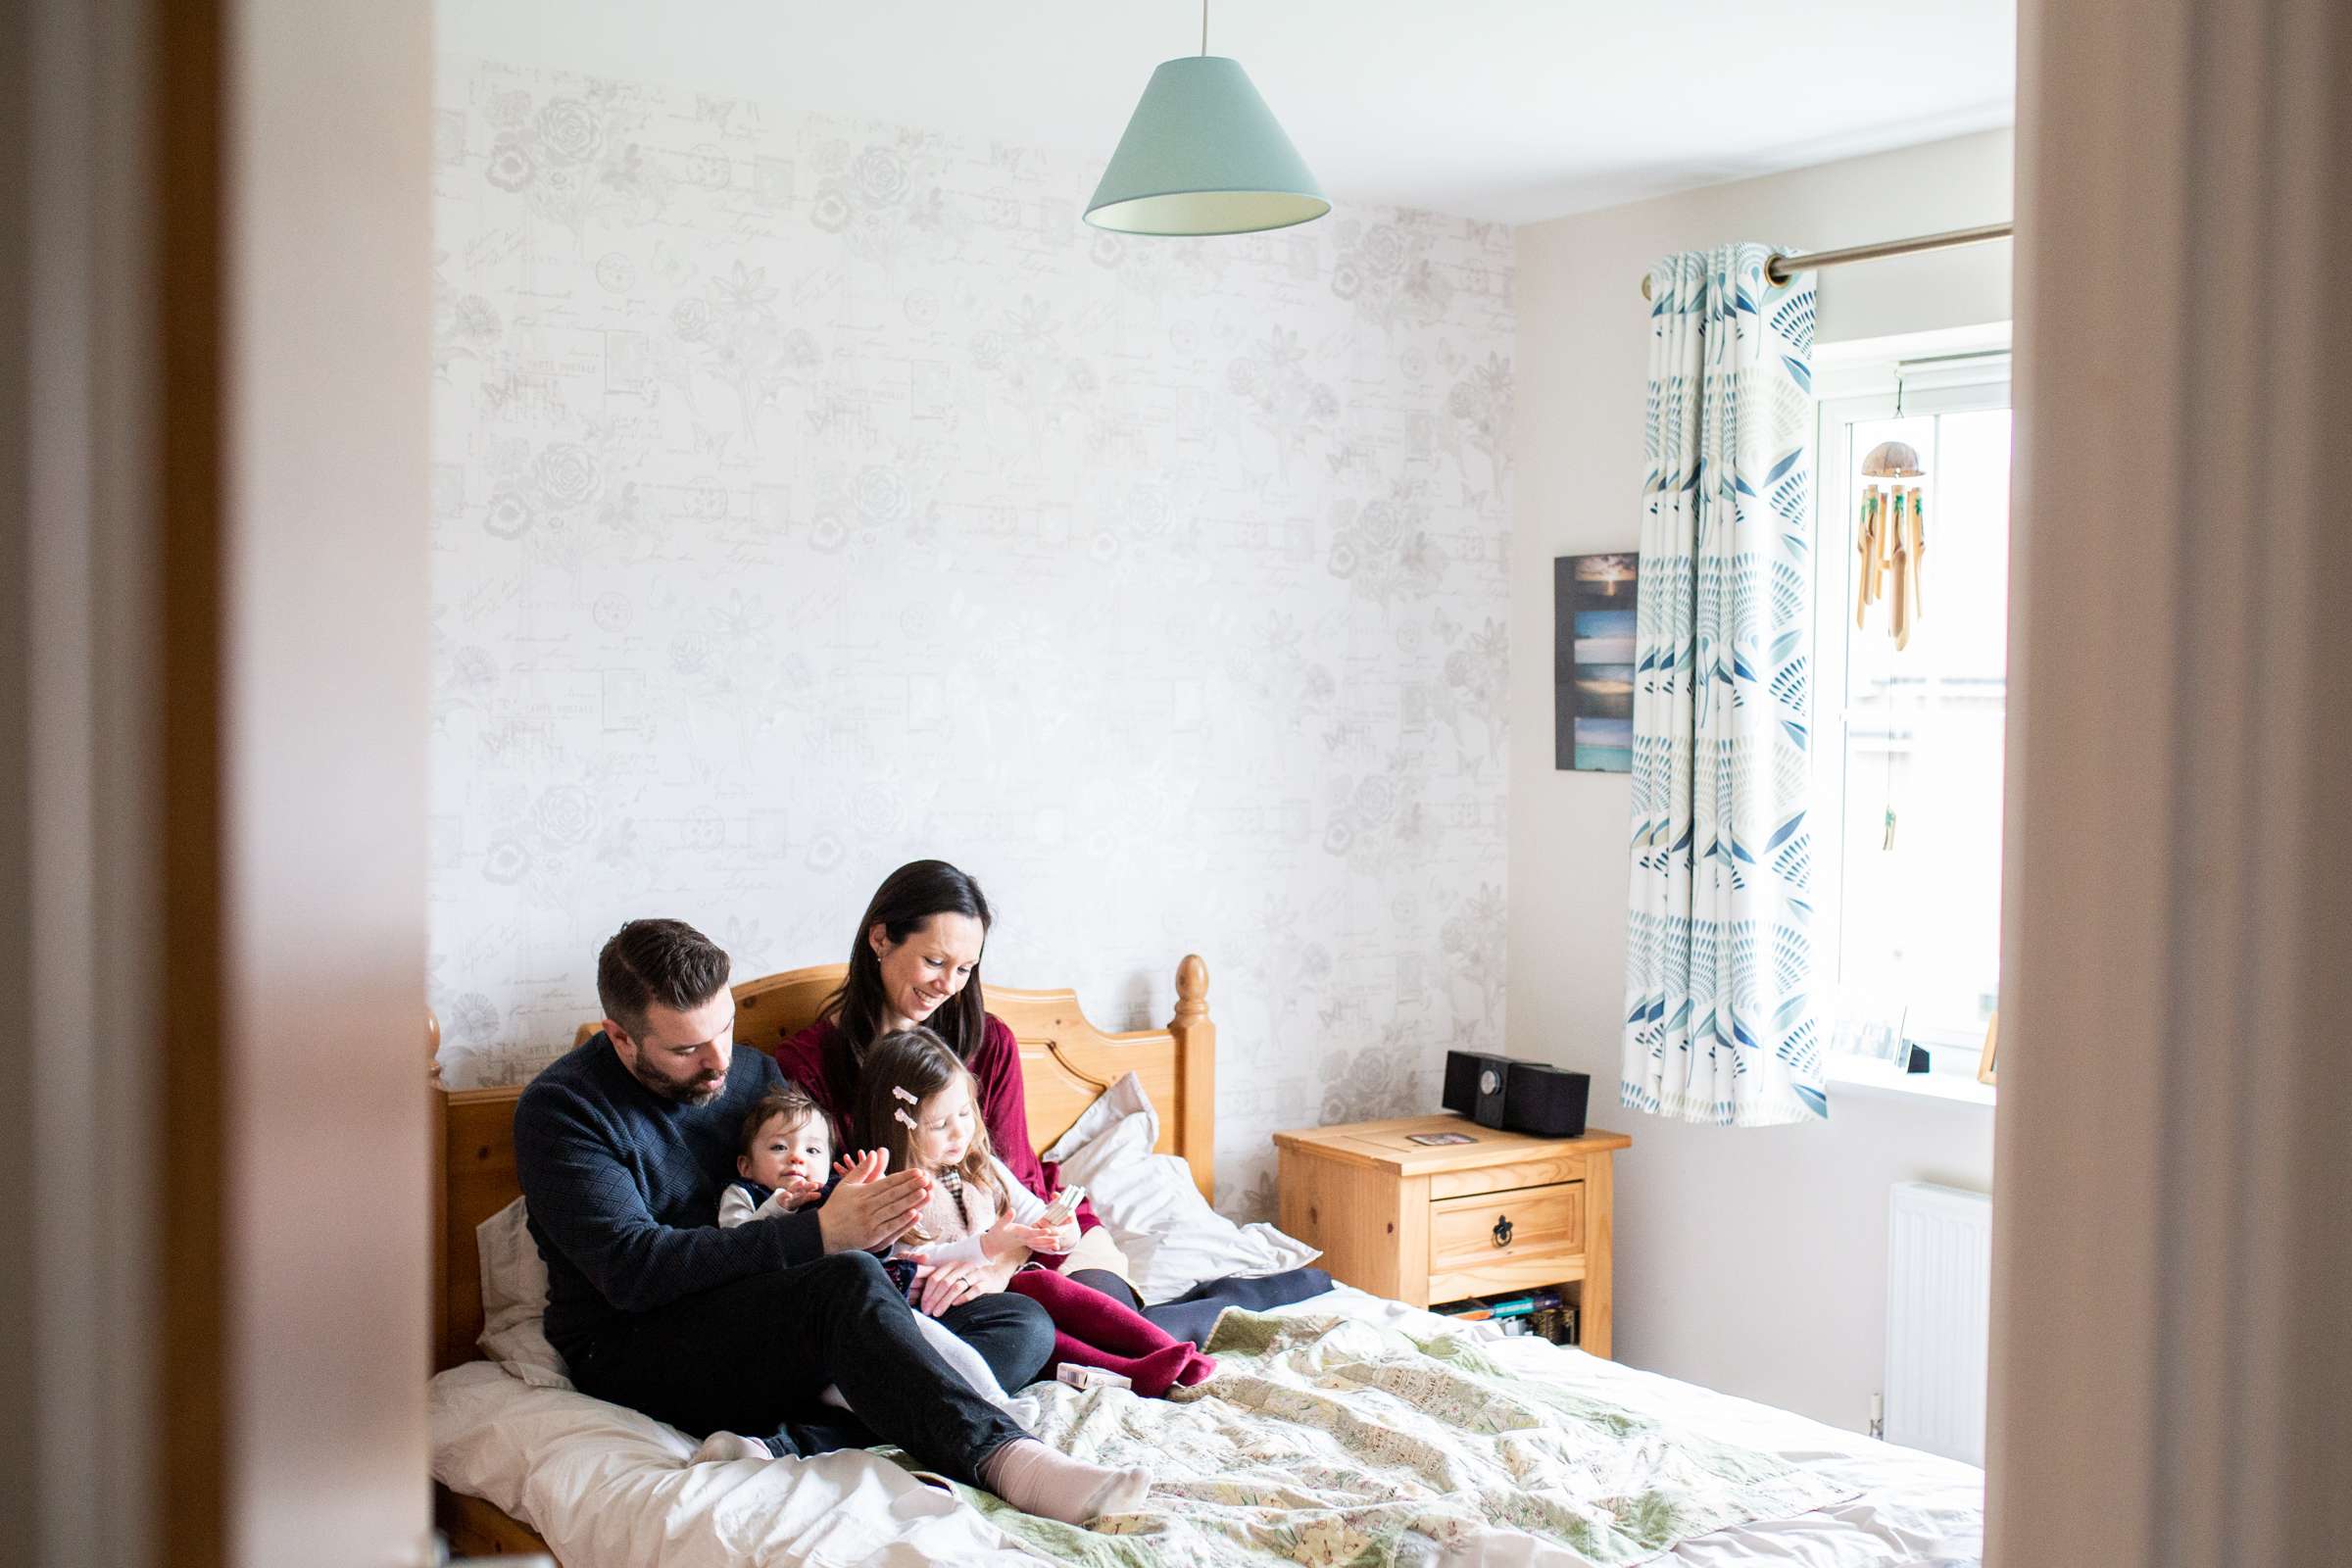 An indoor portrait photo of a family with two small children cuddling on the bed